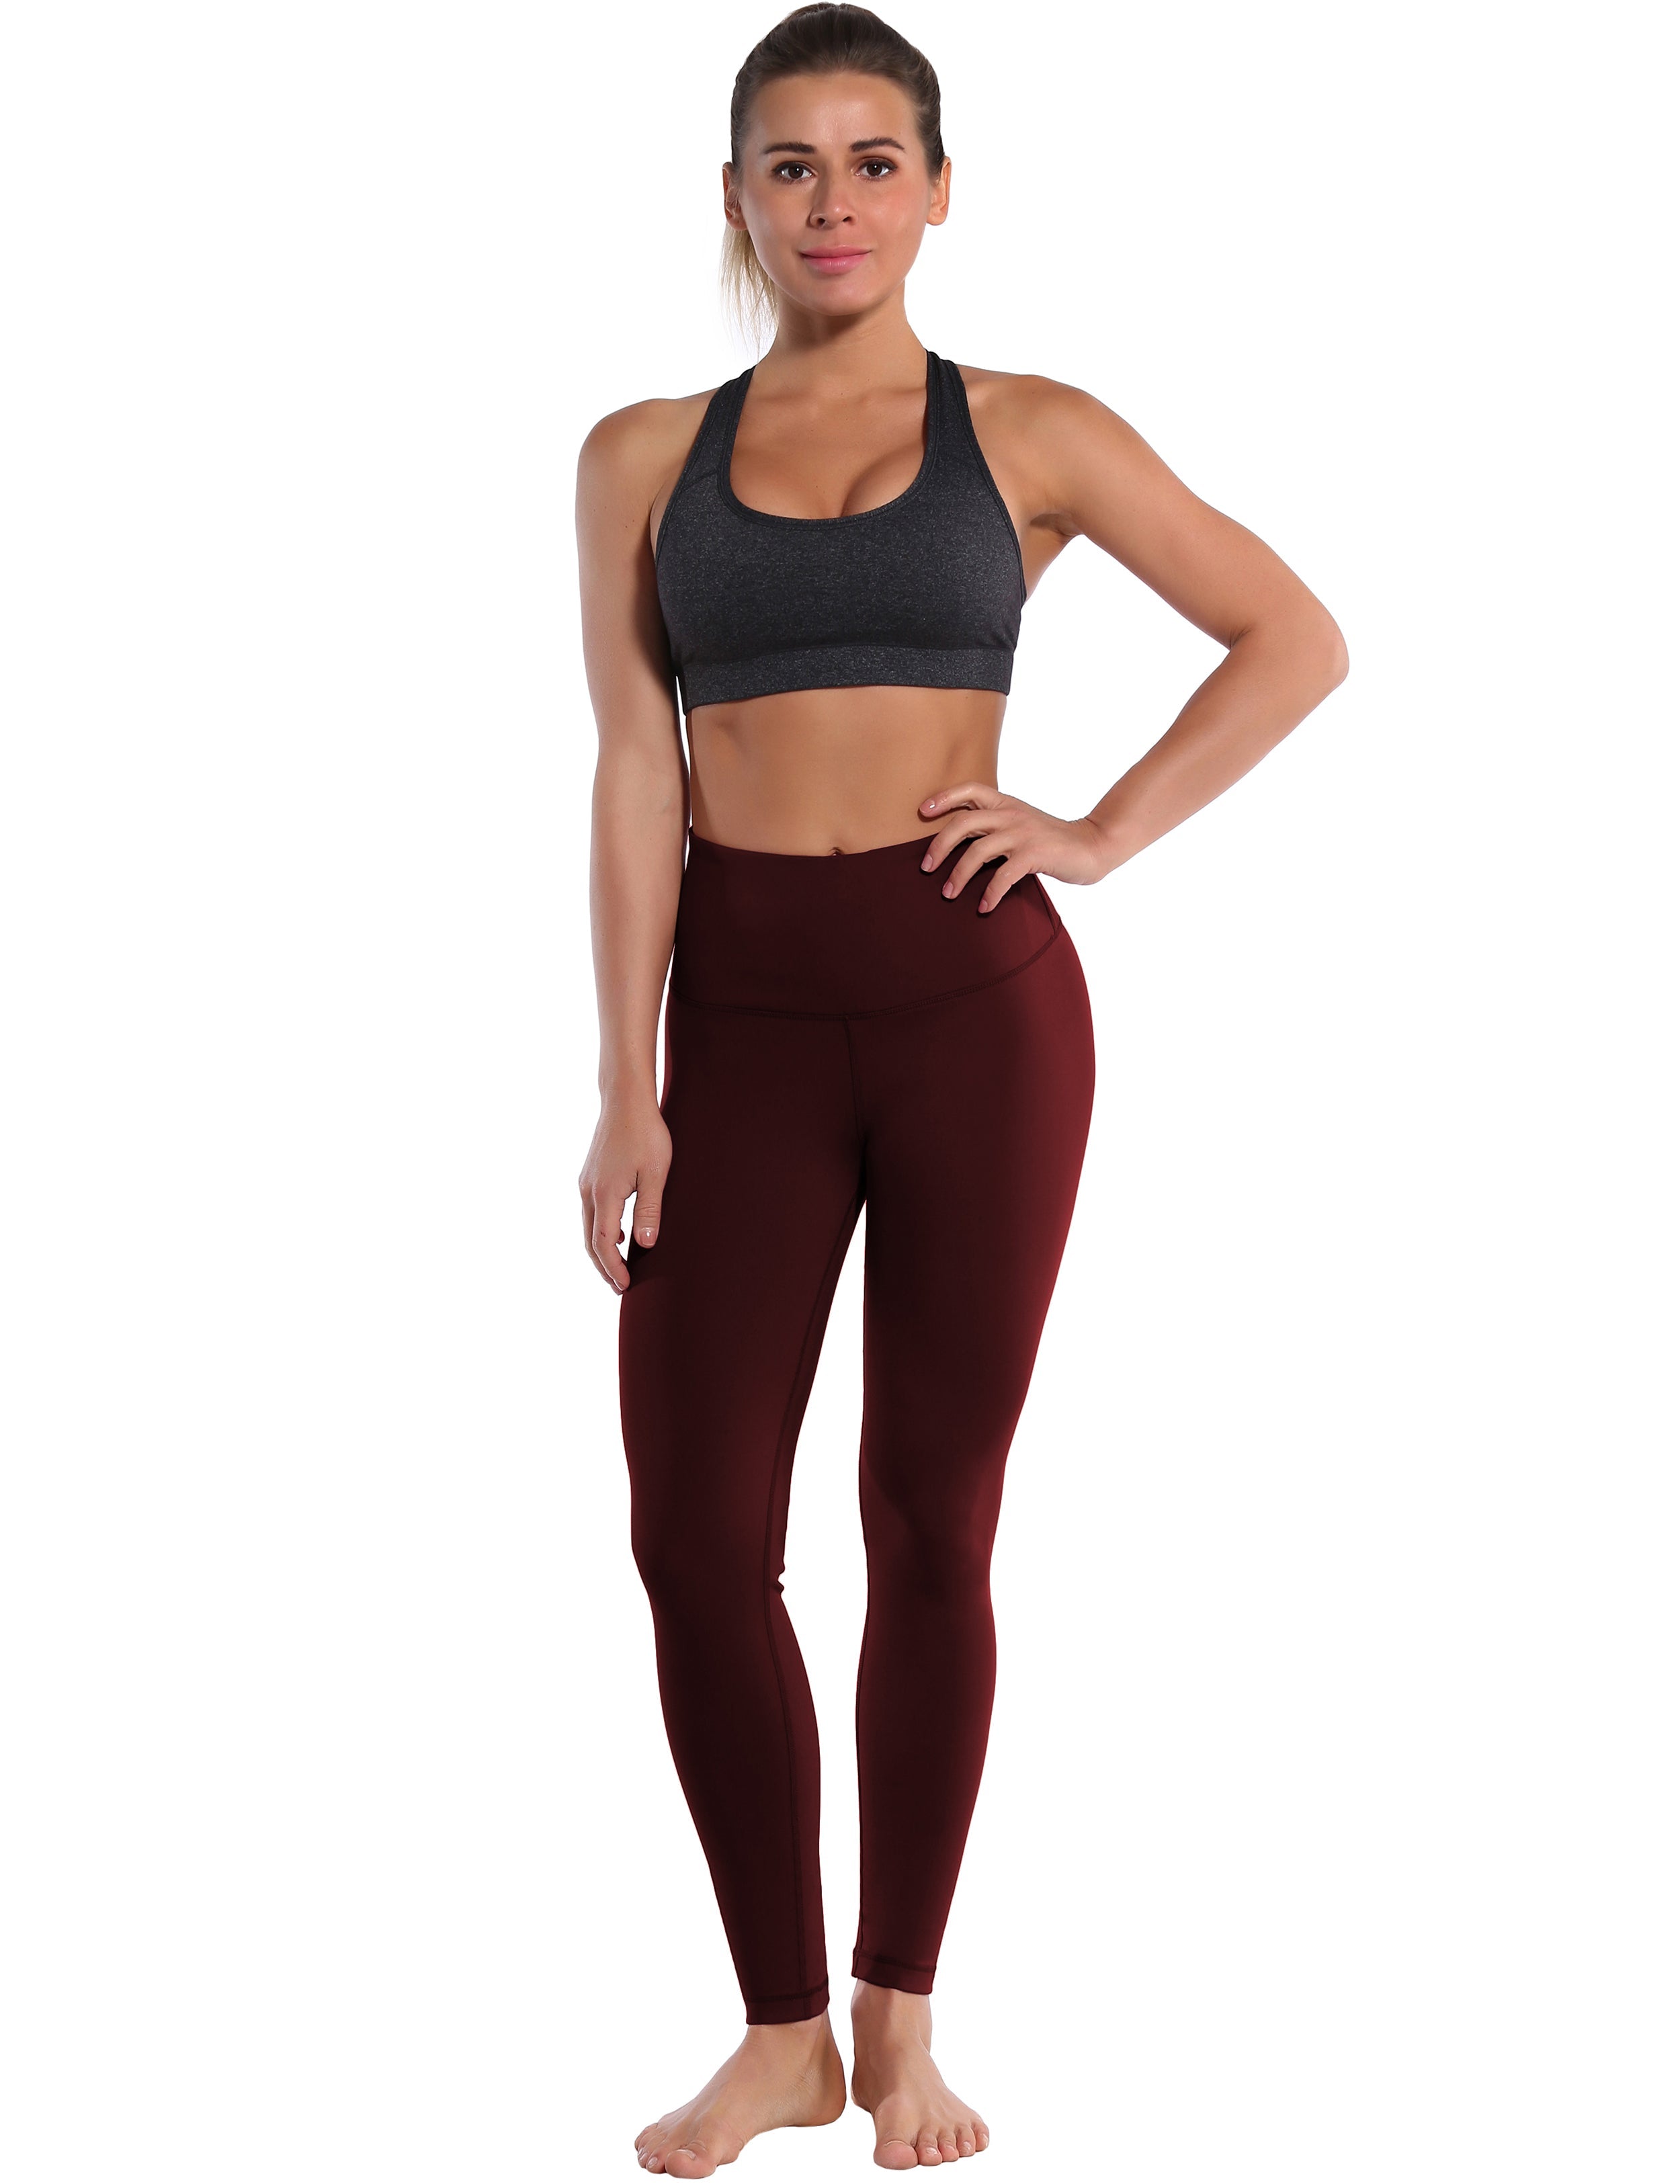 High Waist Pilates Pants cherryred 75%Nylon/25%Spandex Fabric doesn't attract lint easily 4-way stretch No see-through Moisture-wicking Tummy control Inner pocket Four lengths